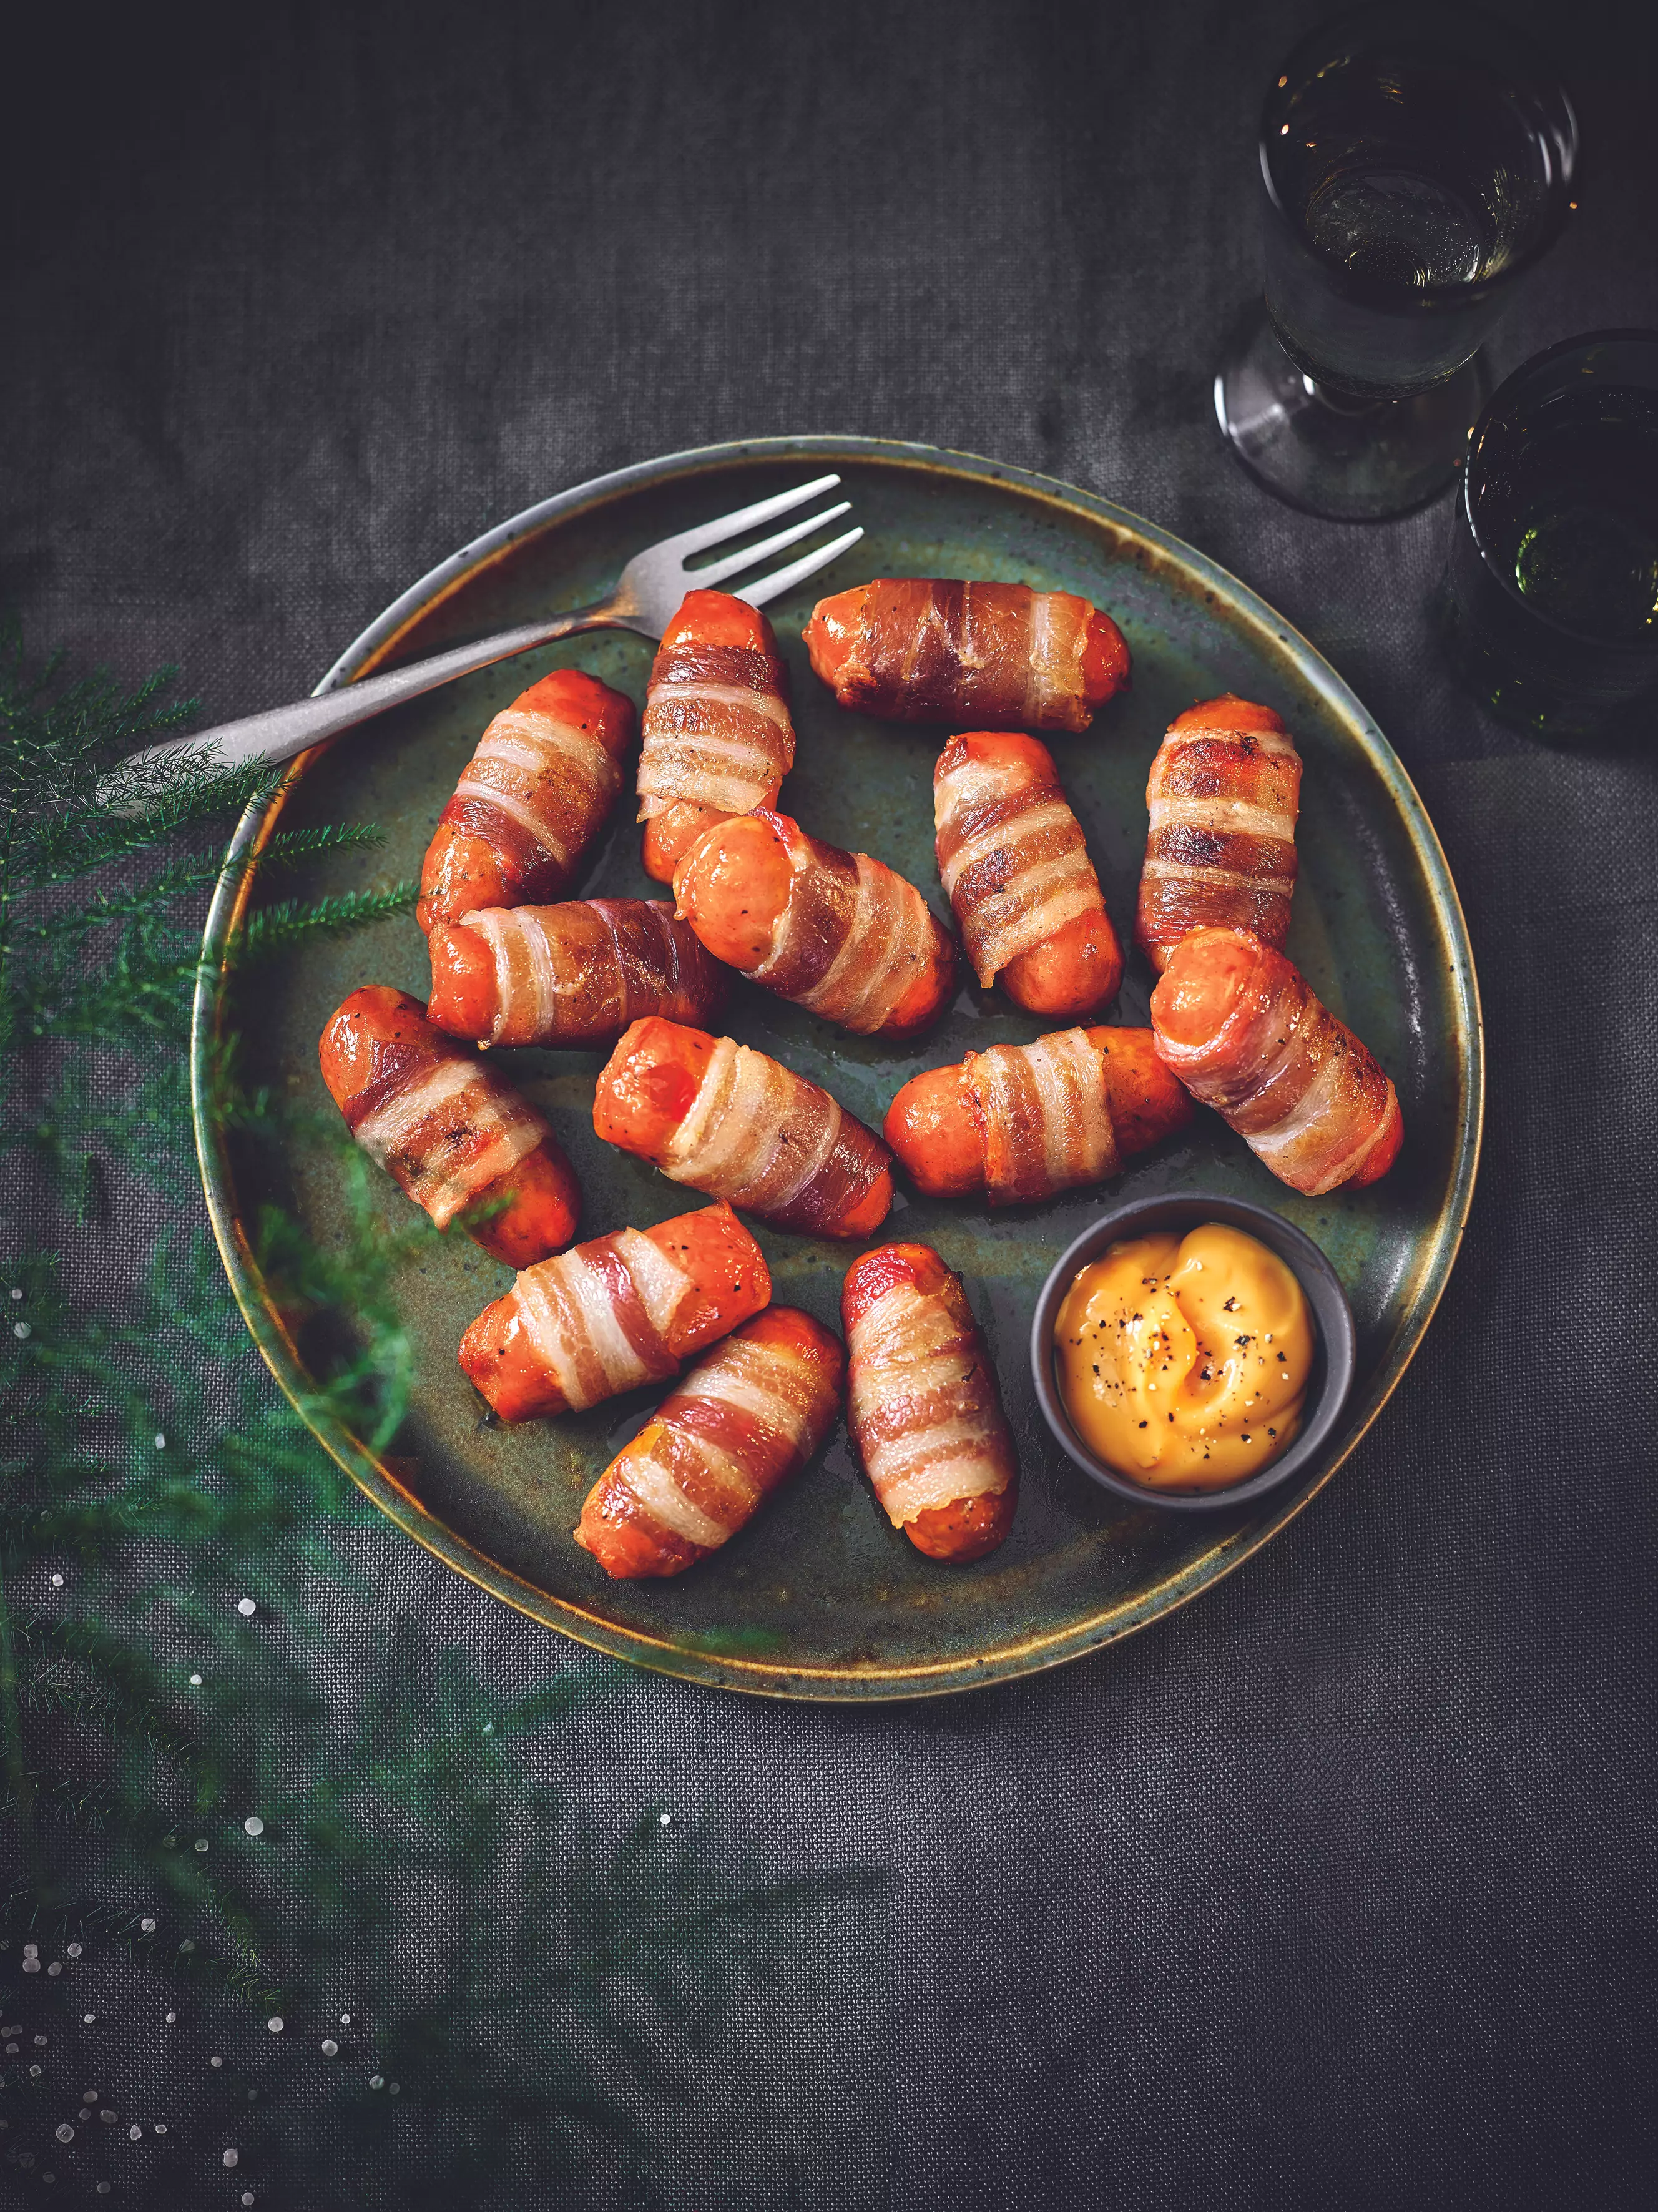 Chorizo-style pigs in blankets.